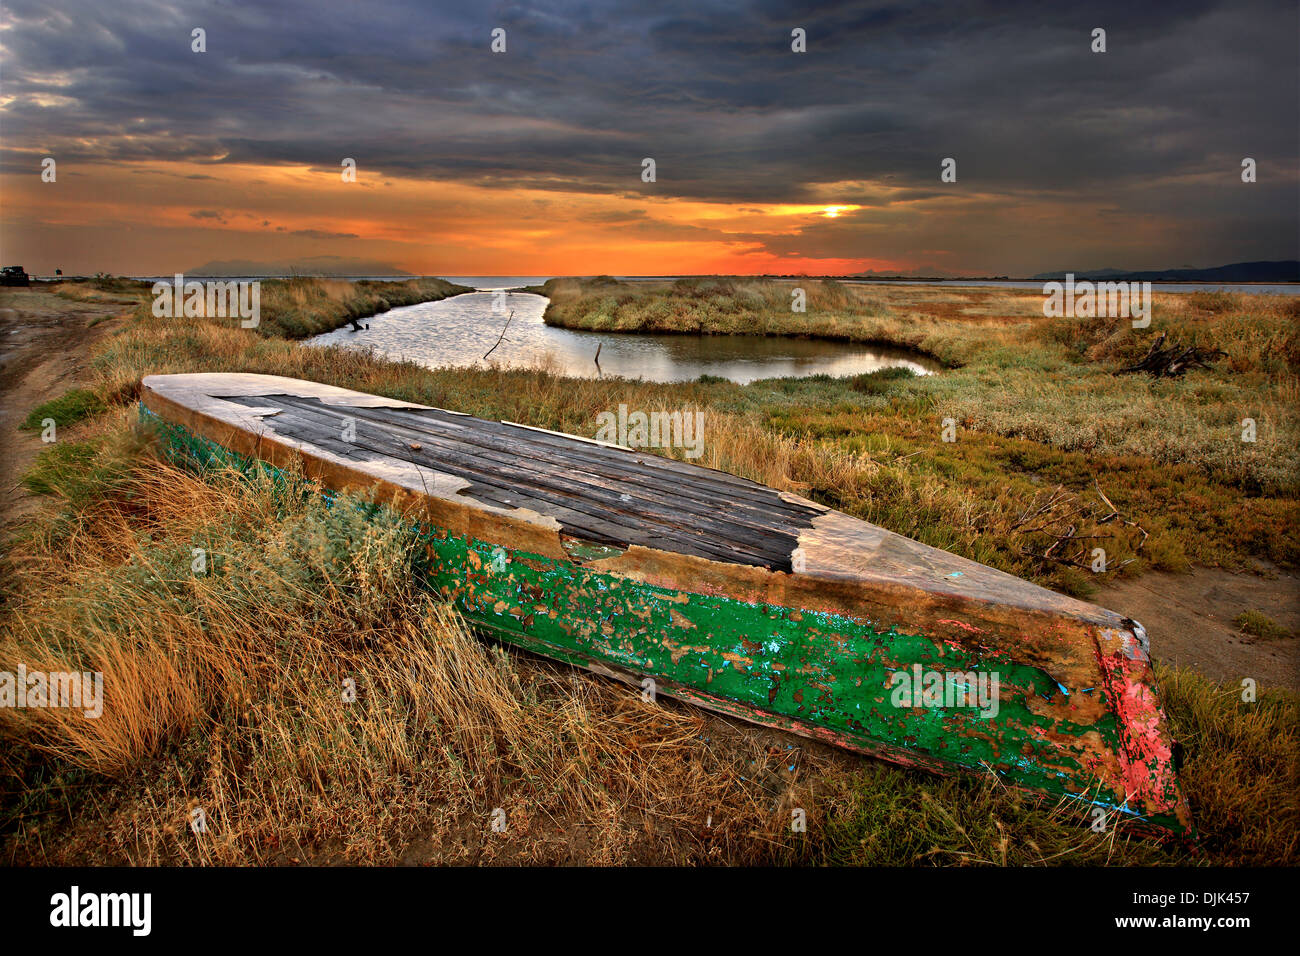 Traditional plava (flat bottomed boat of the shallow waters) at the Delta of Evros river, Thrace, Greece. Stock Photo